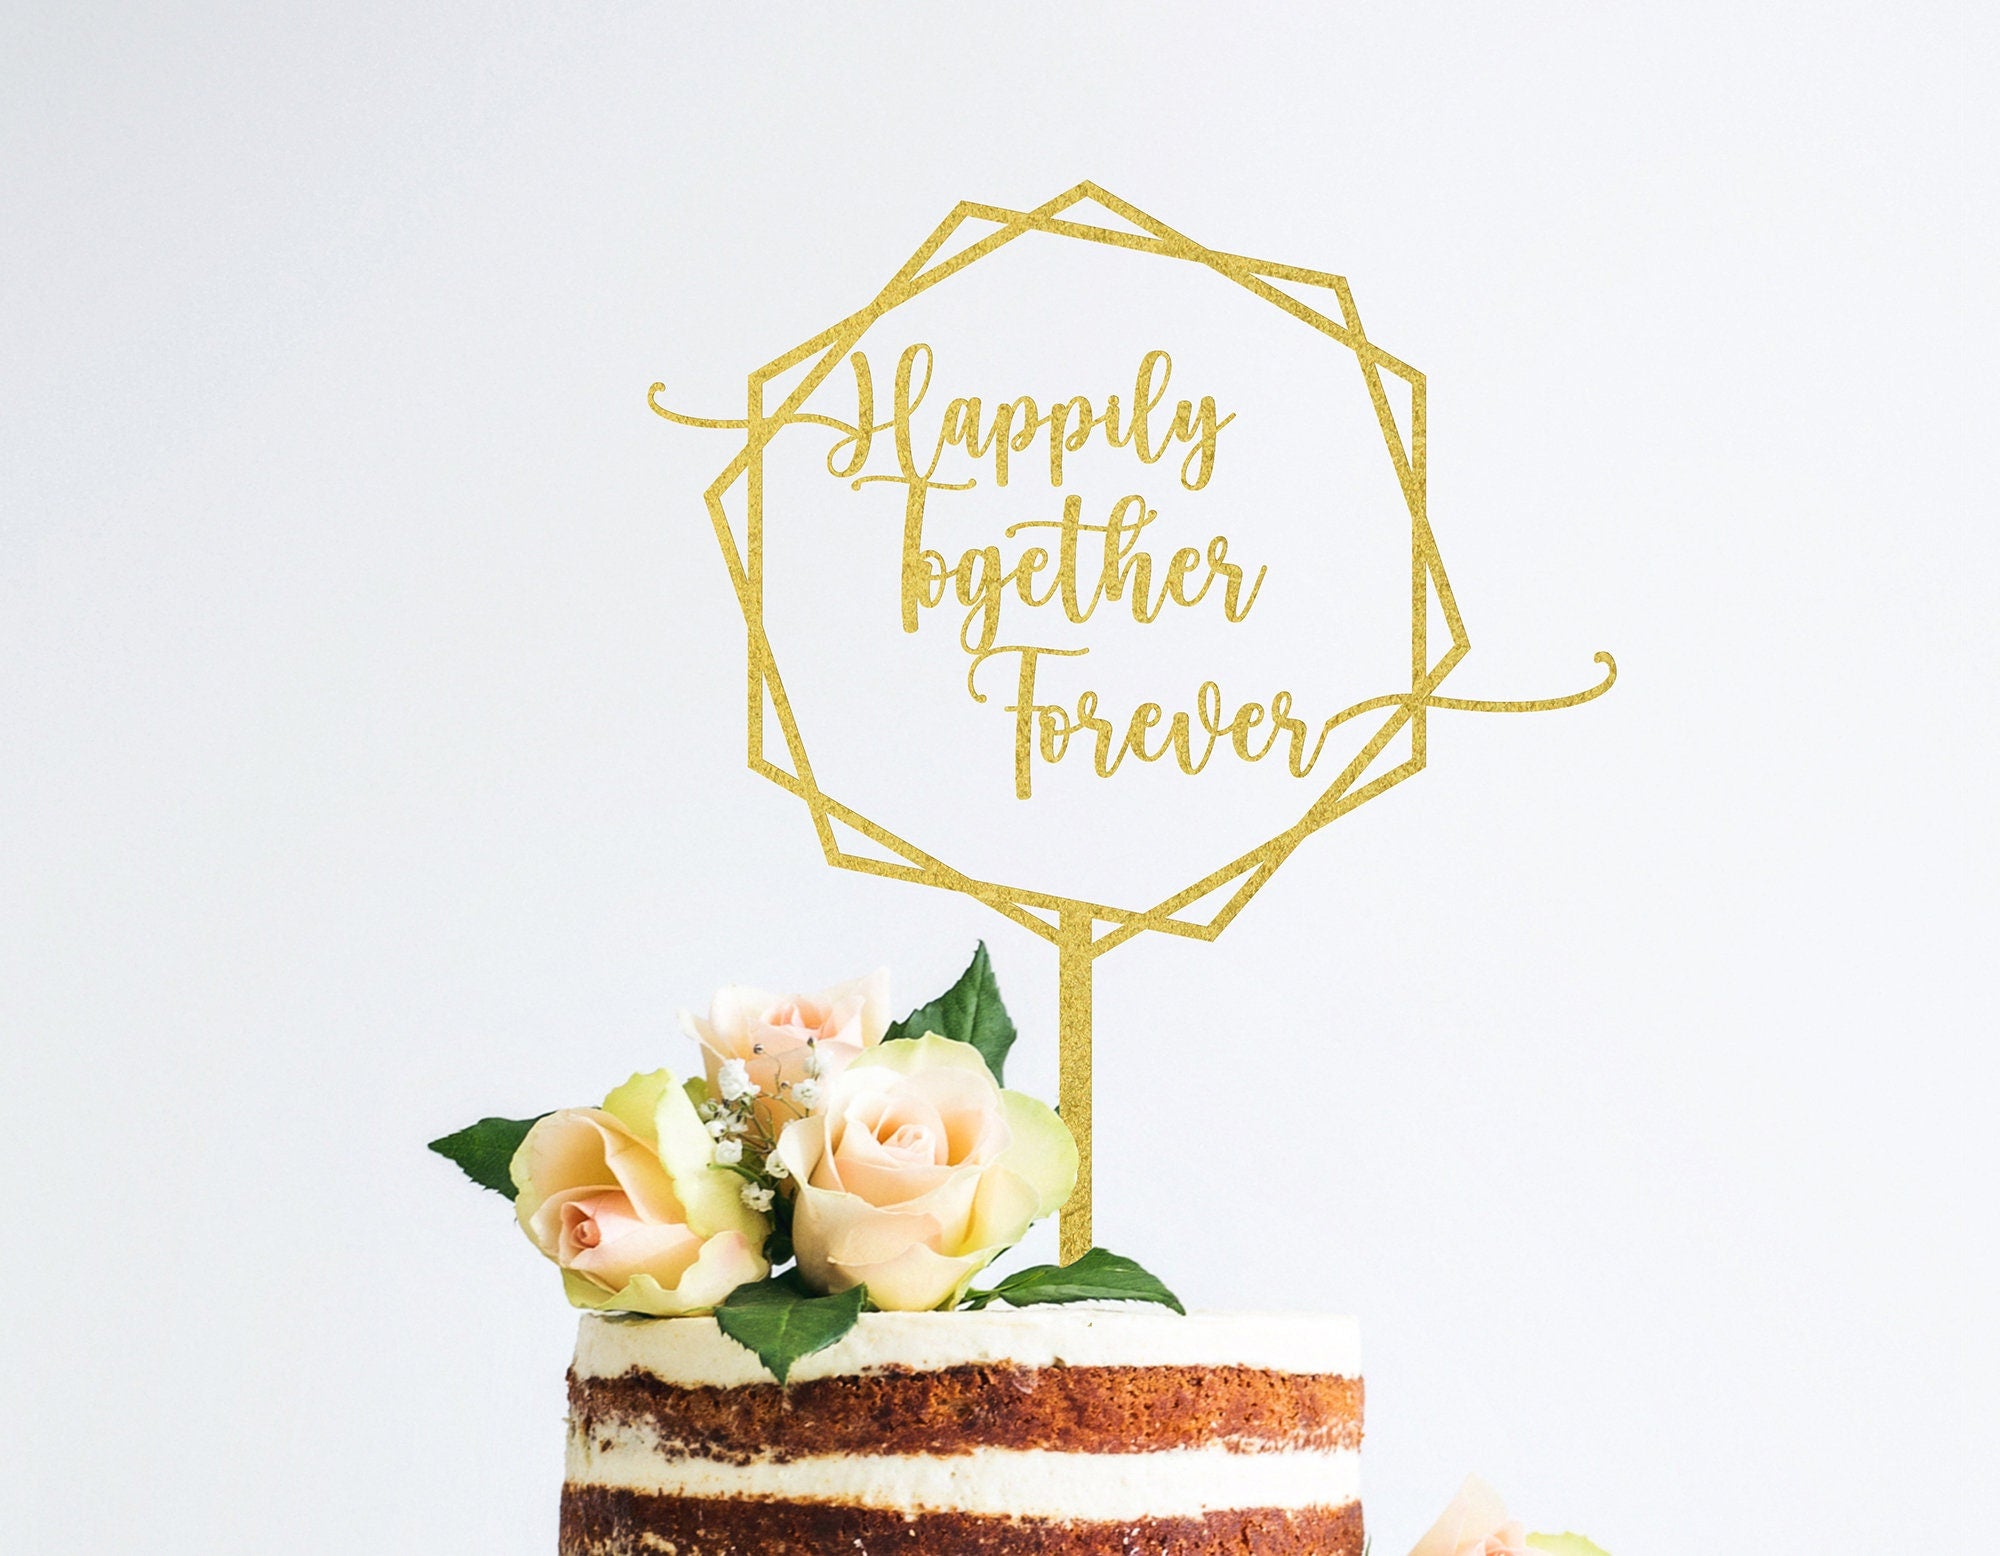 Together Forever Hexagon Cake Topper Birthday Party Cake Decoration